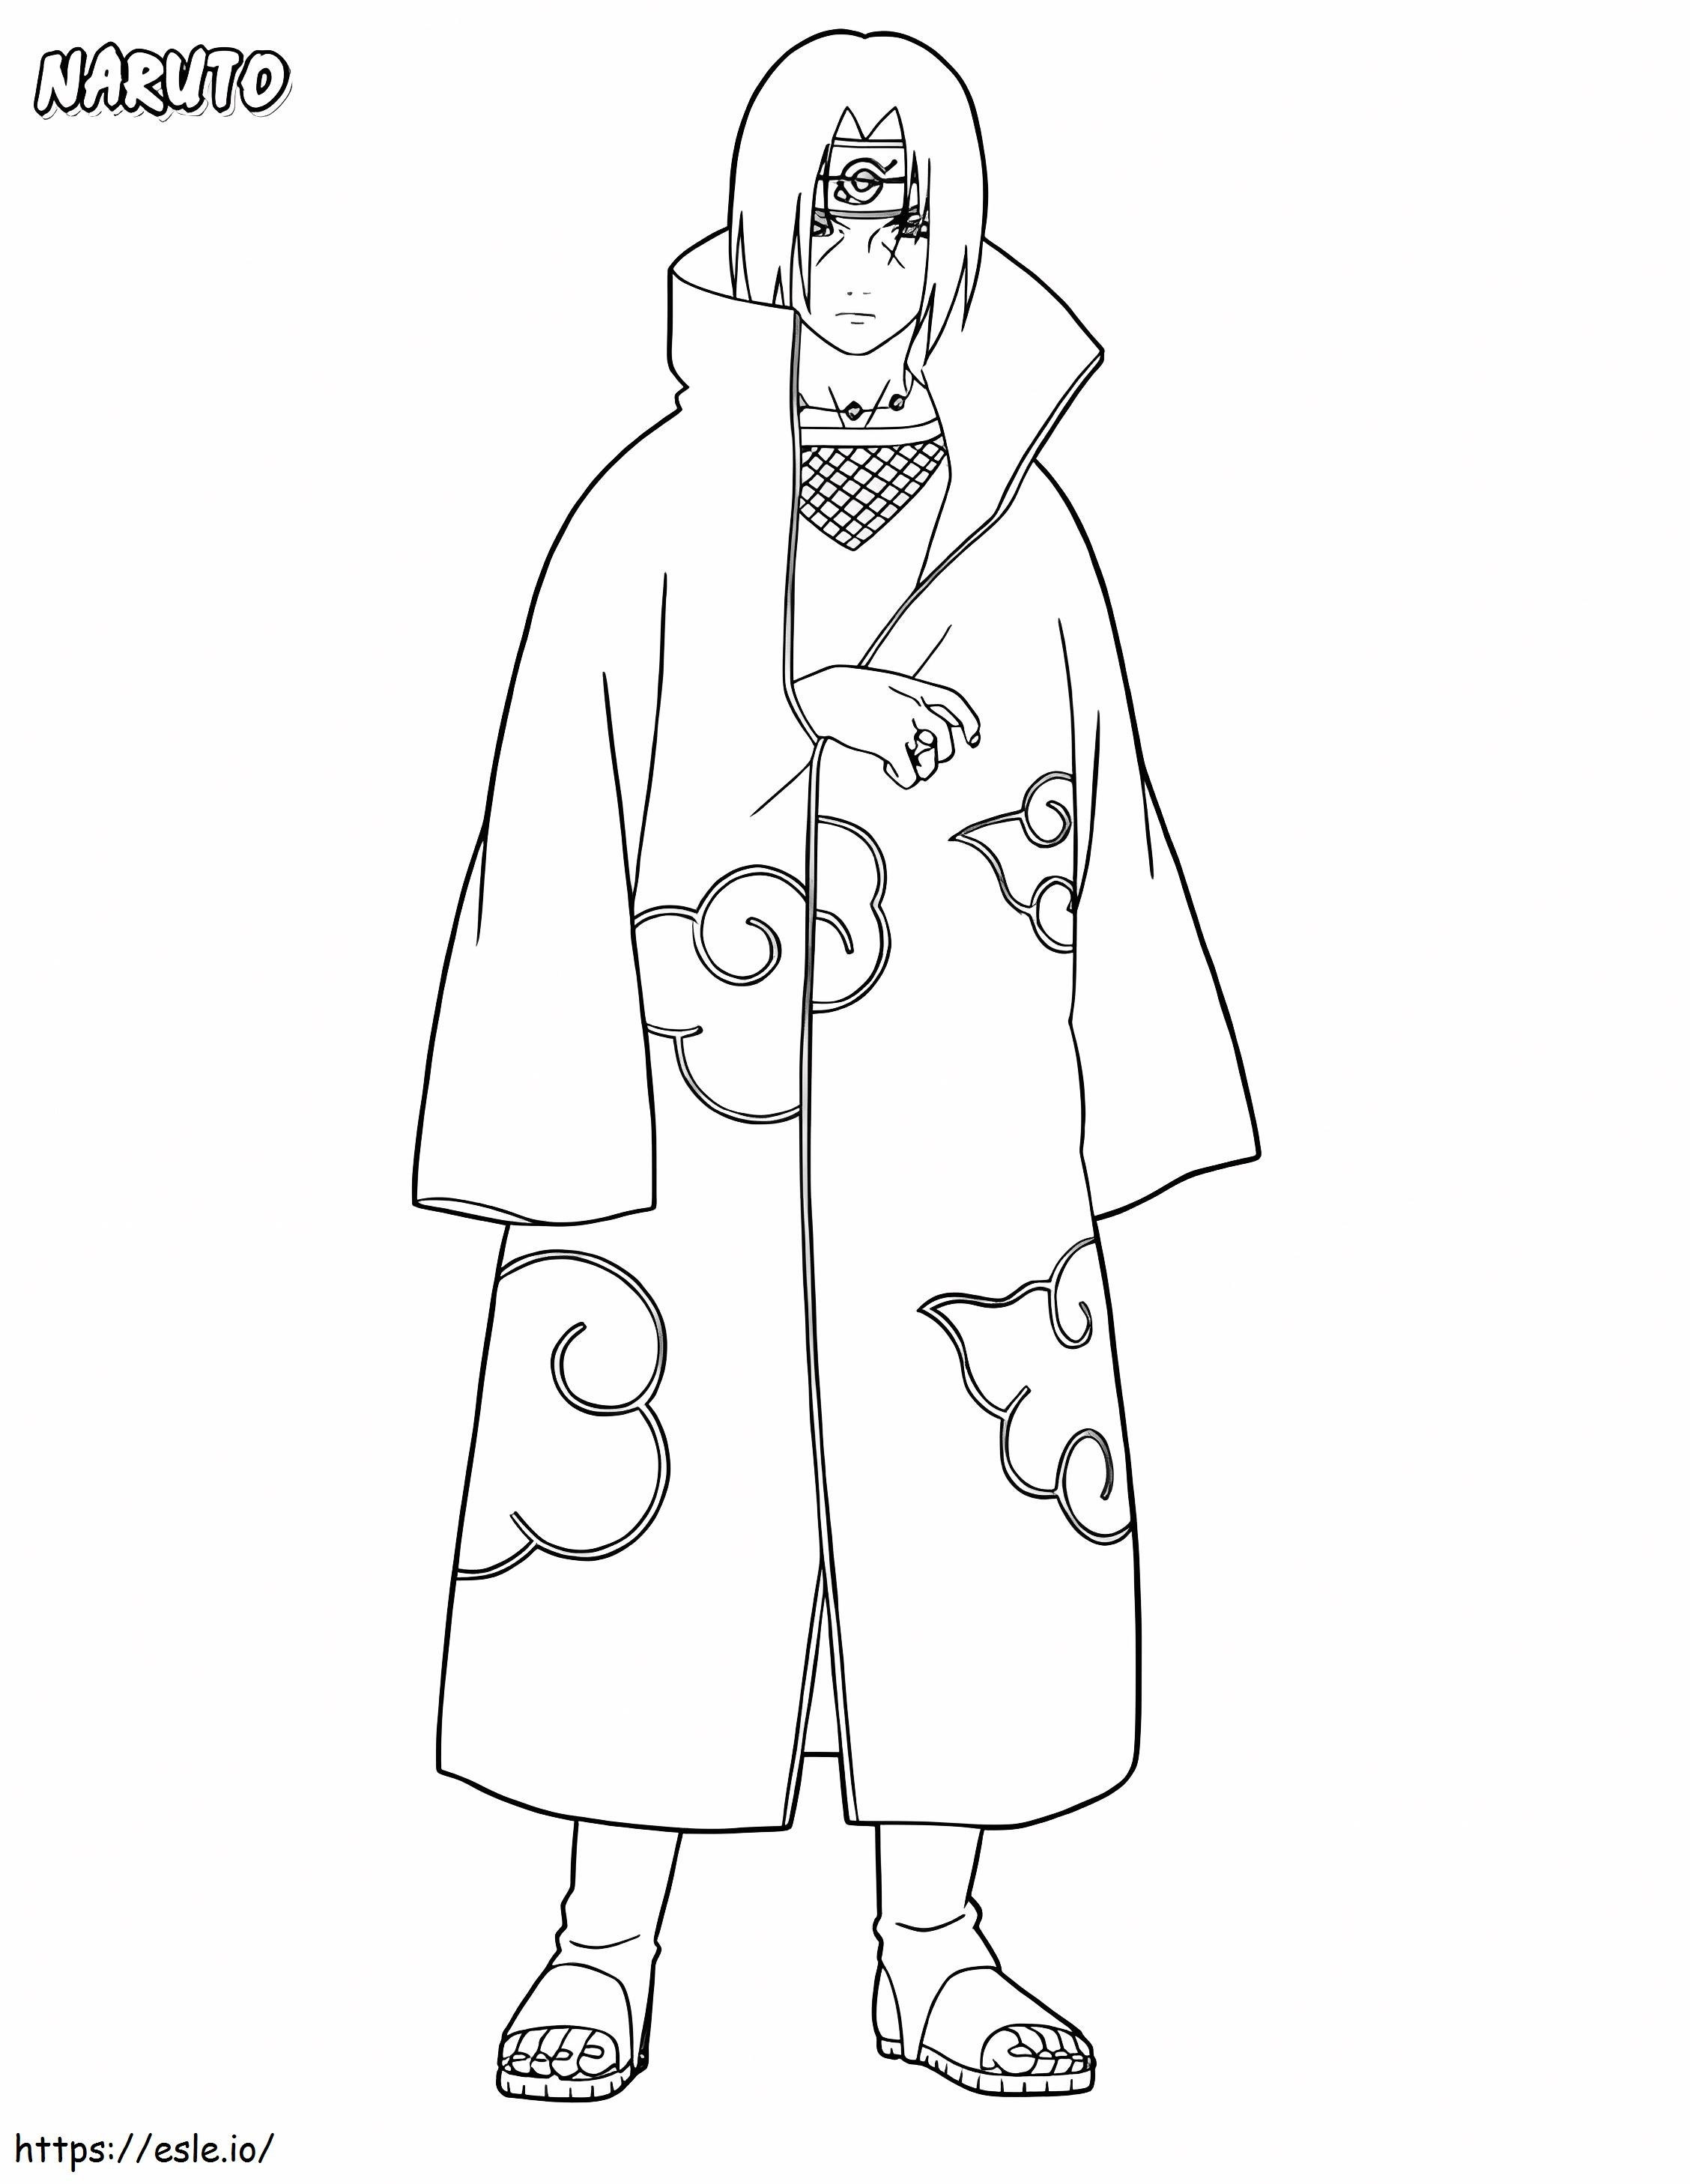 1561101793 Itachi A4 coloring page